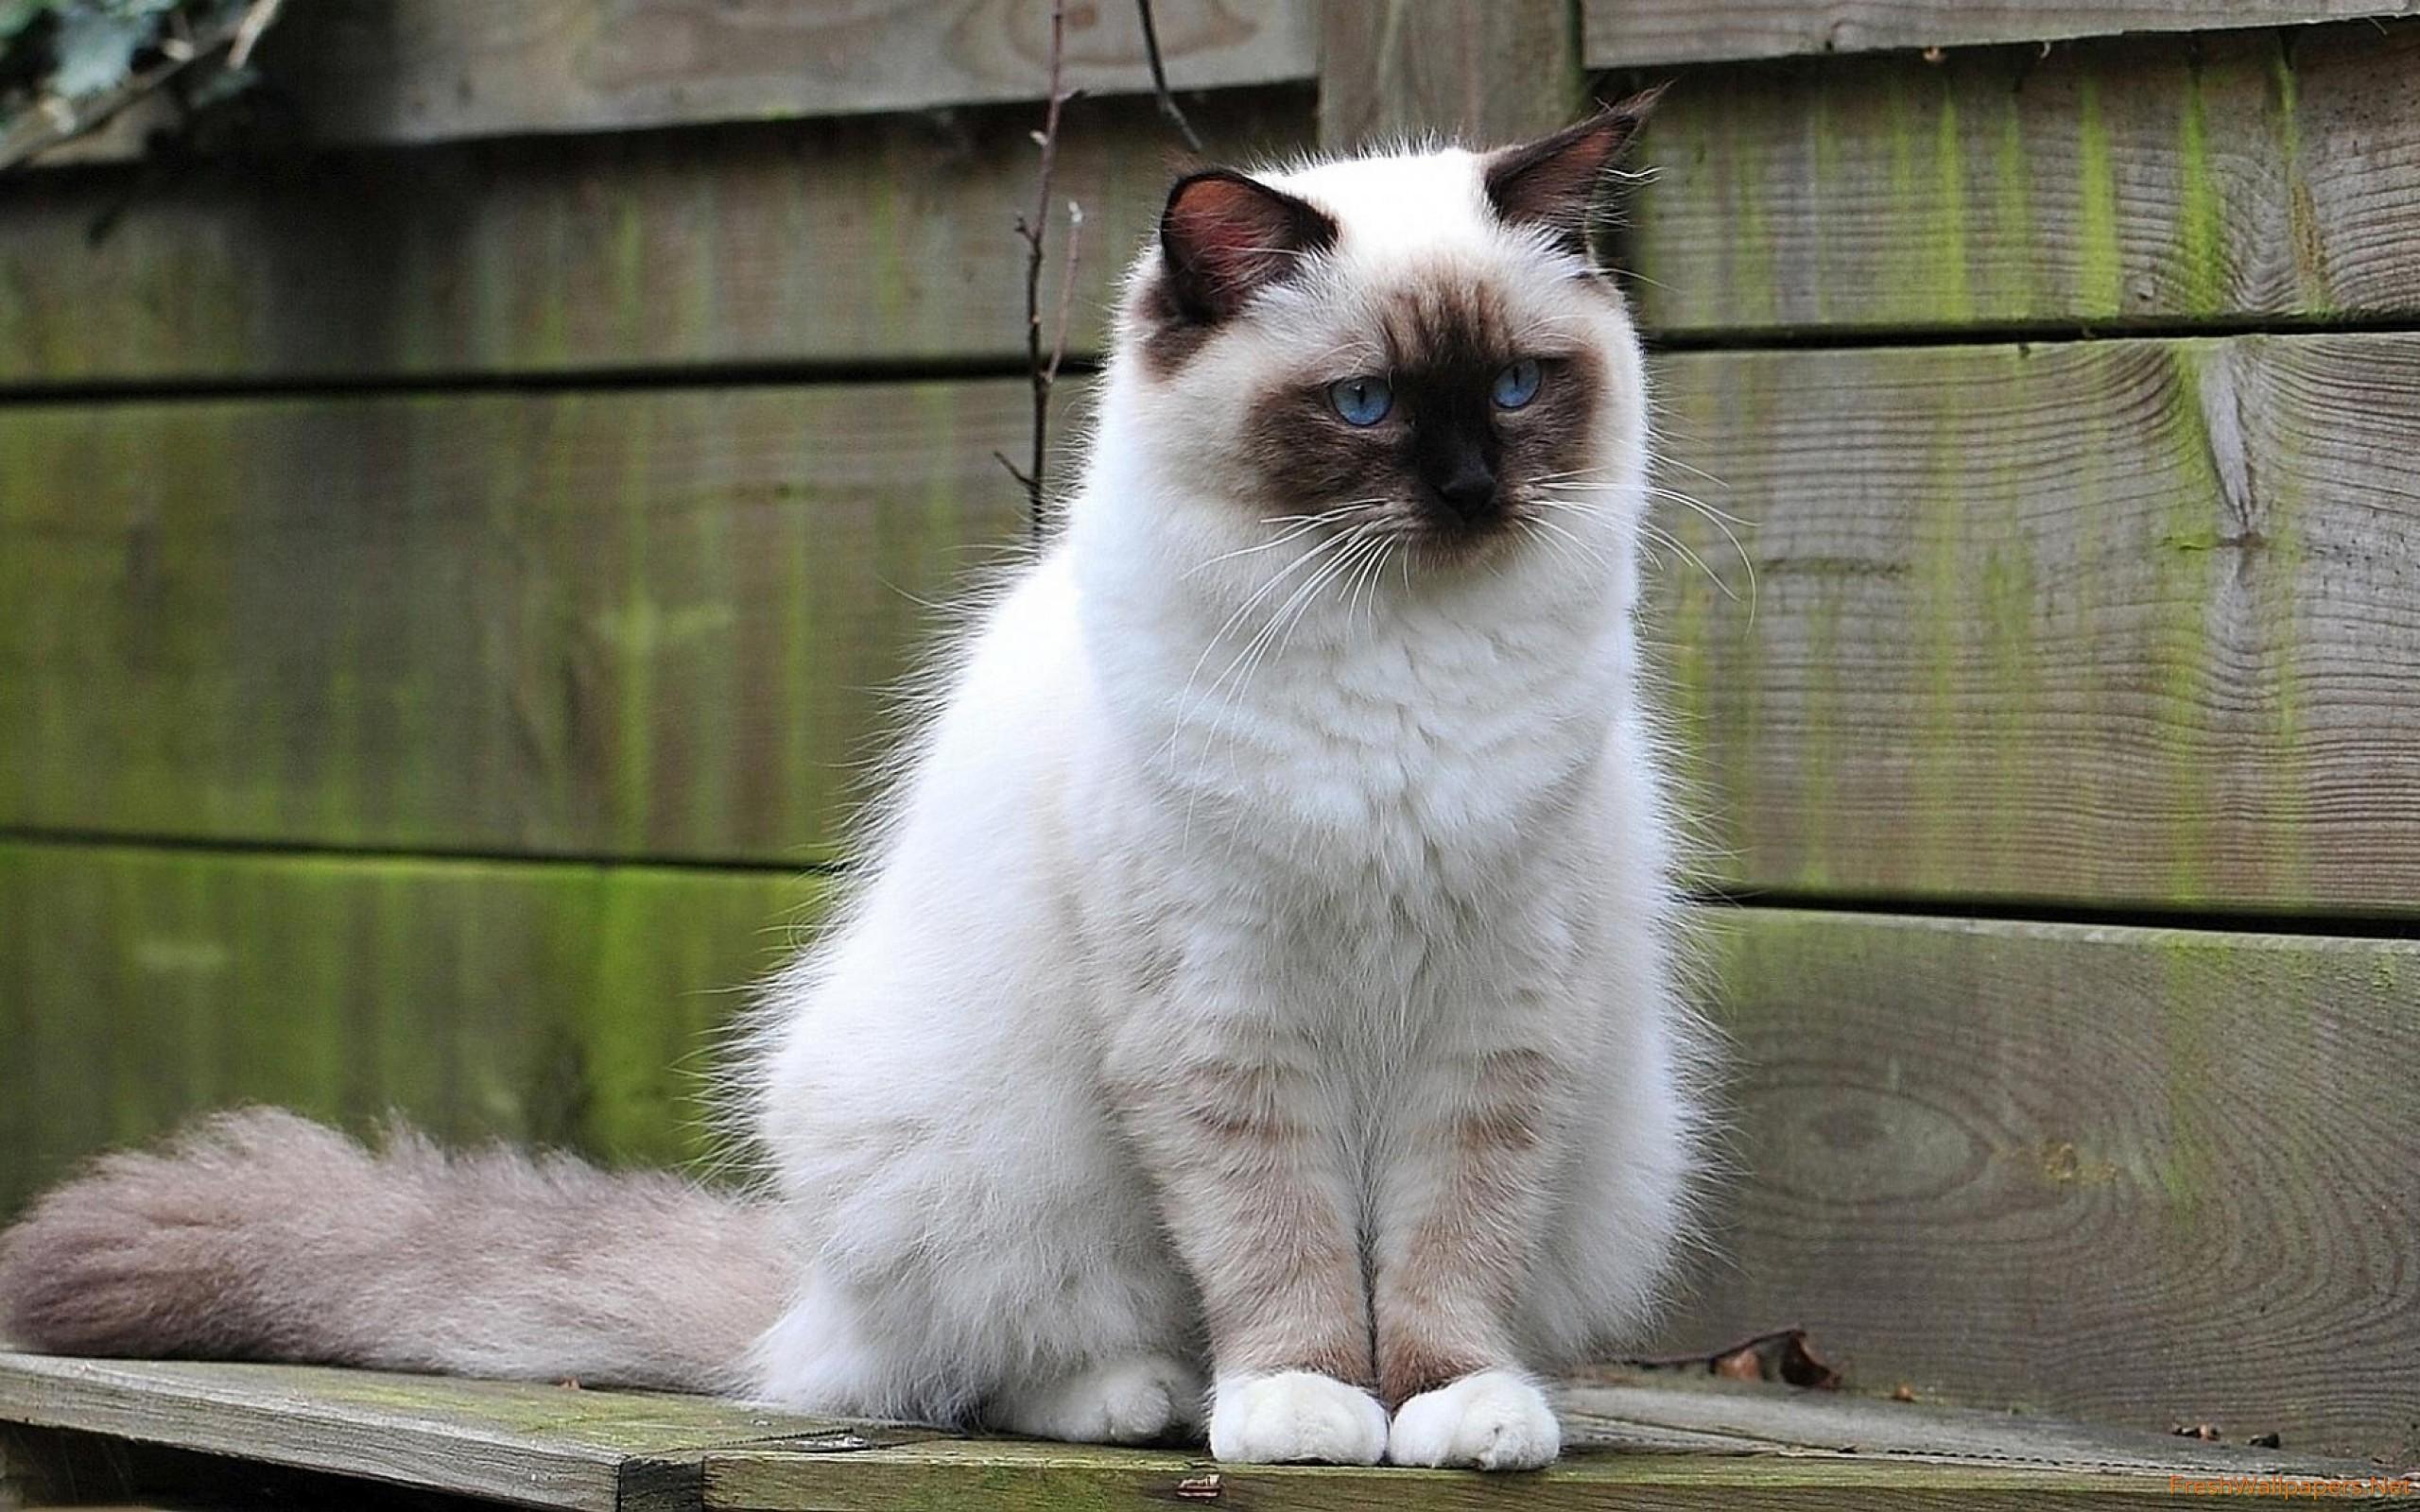 White fluffy cat by the wooden fence wallpaper